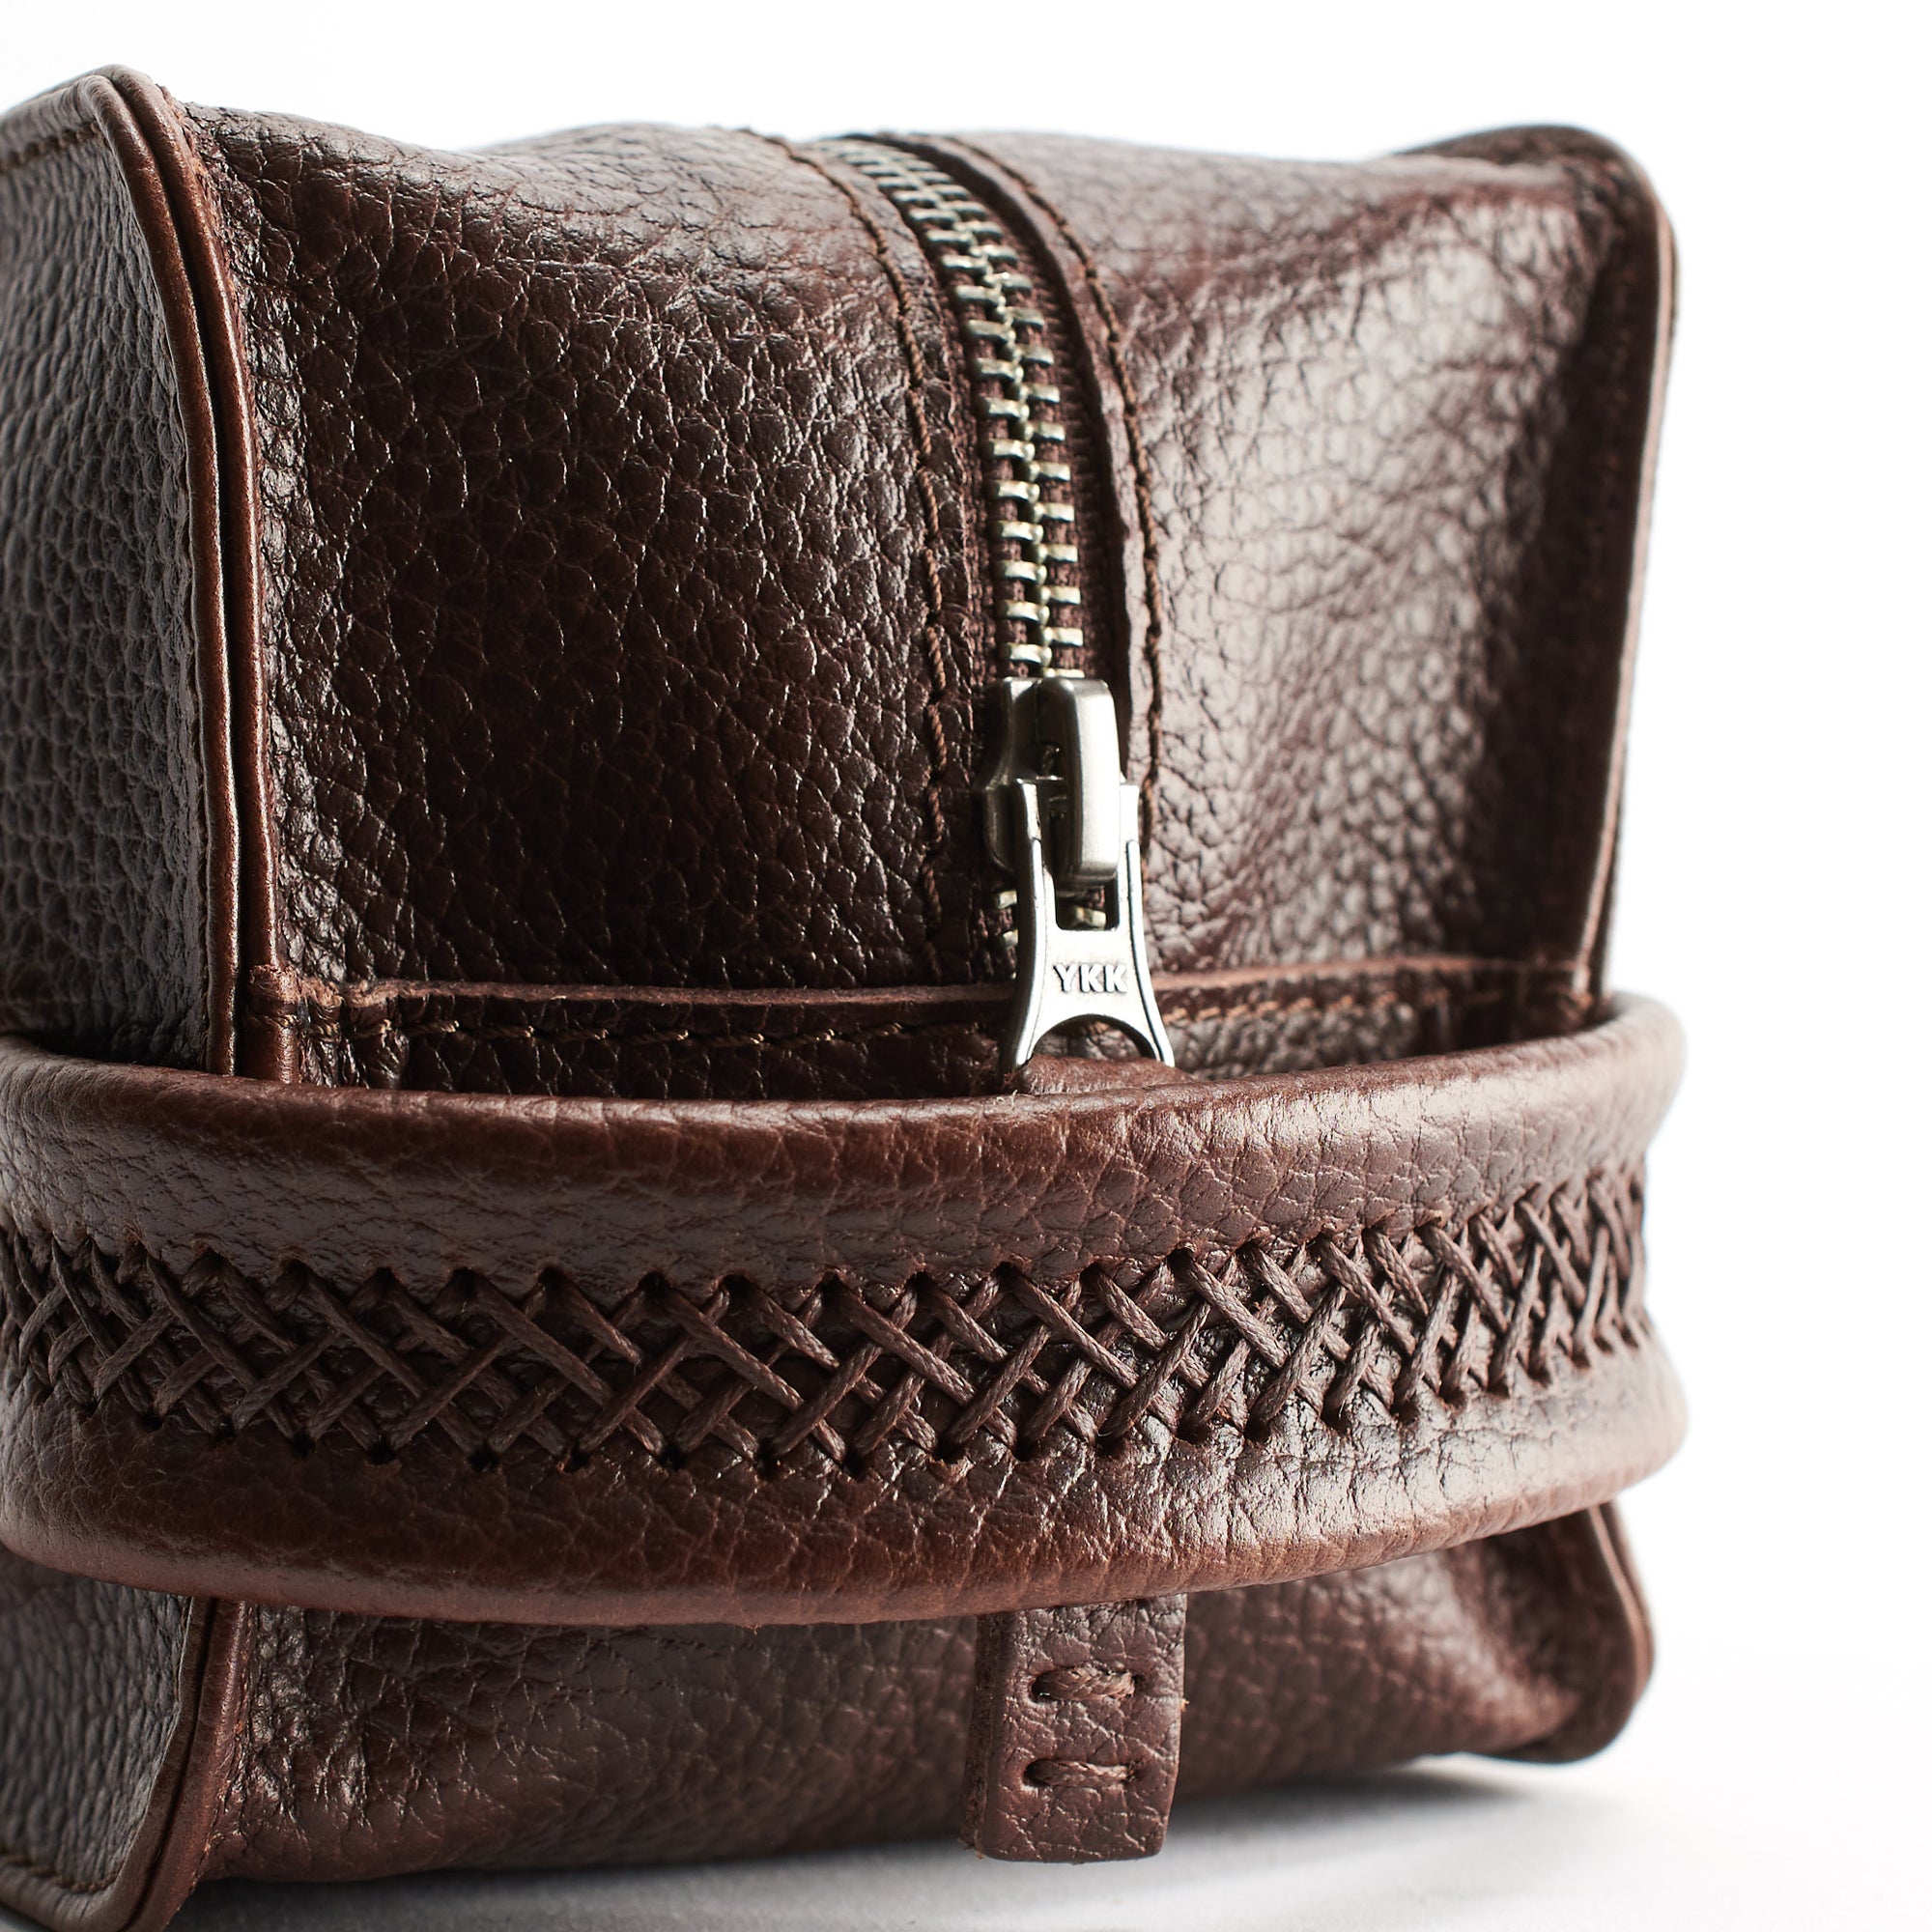 Hans stitch. Dark Brown leather toiletry, shaving bag with hand stitched handle. Groomsmen gifts